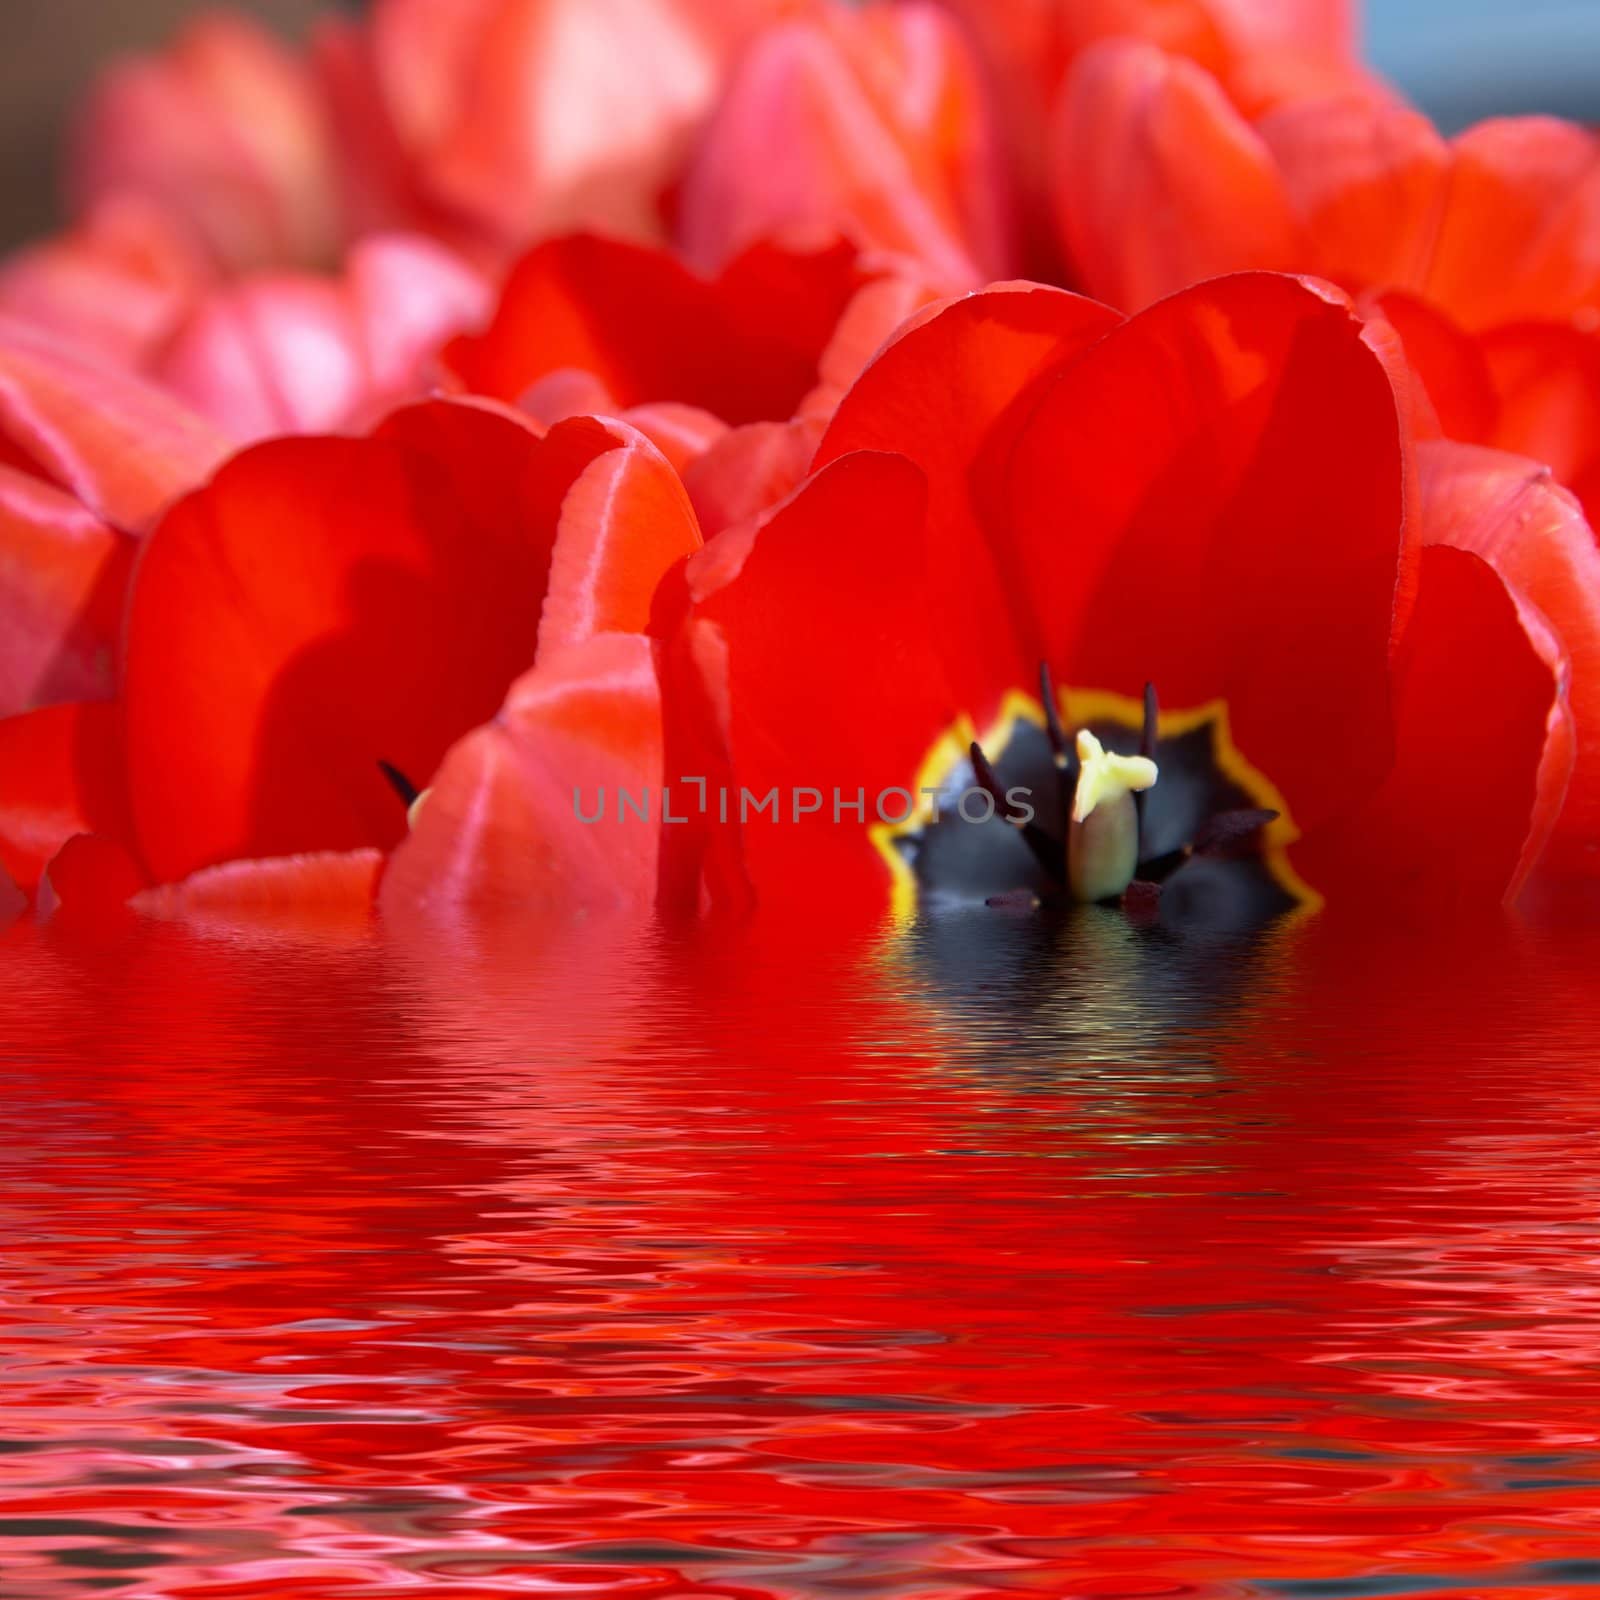 An image of nice red tulip in water